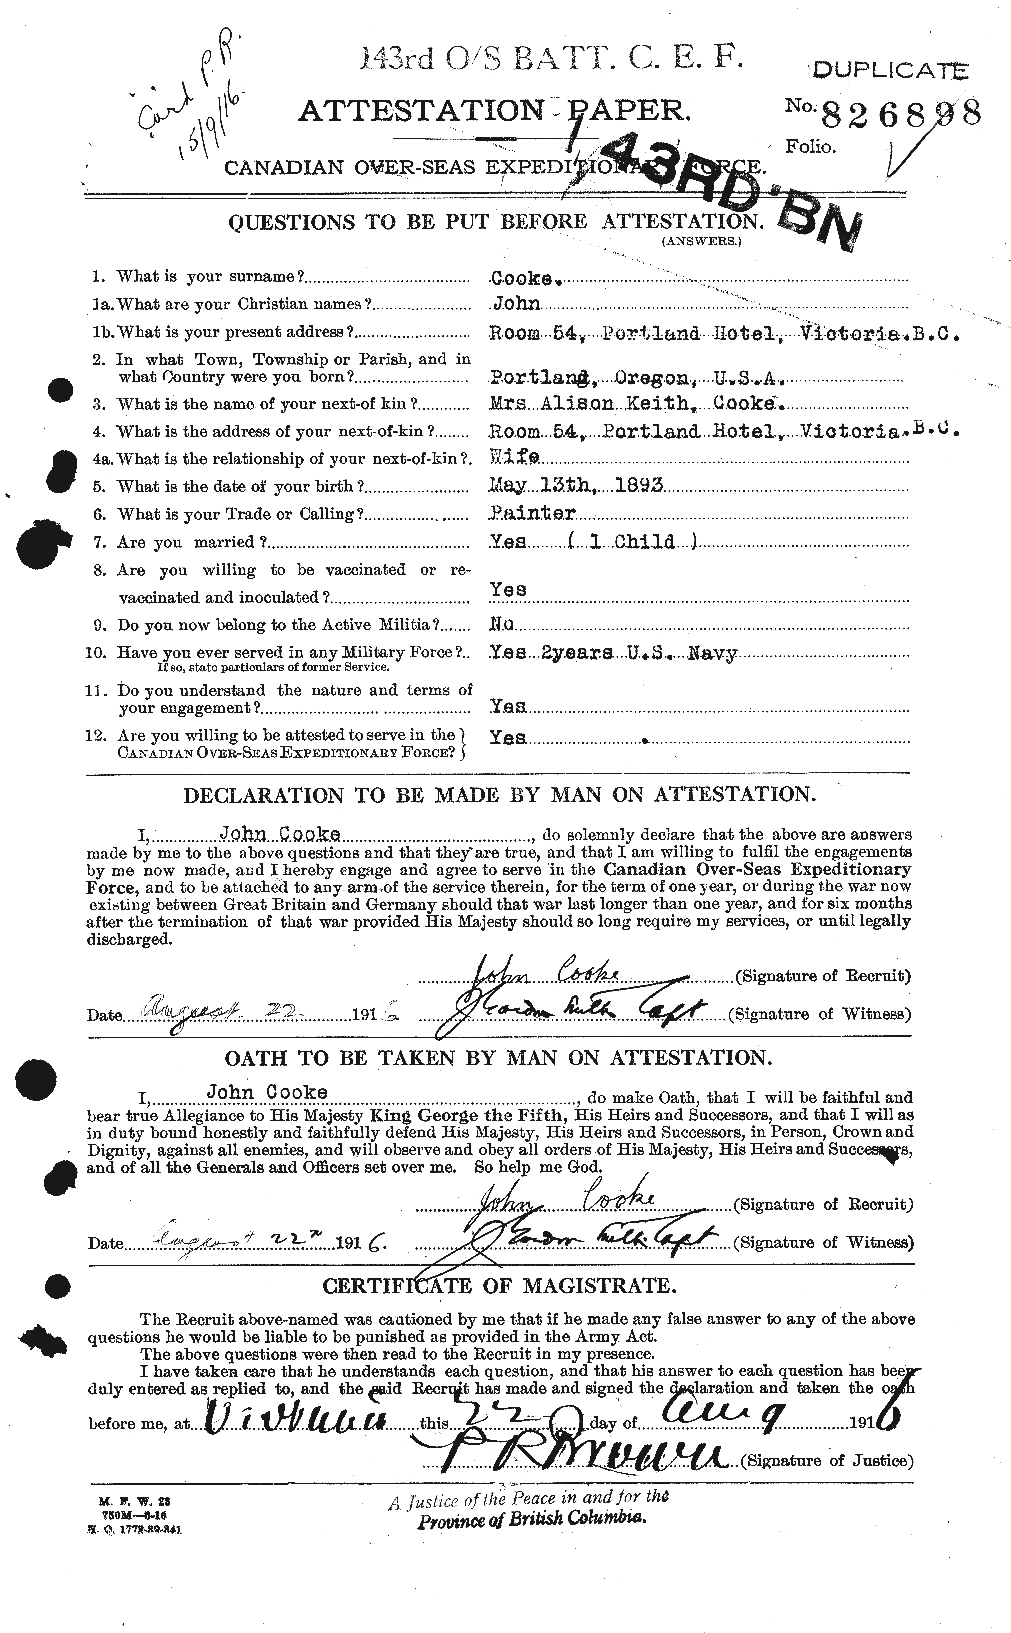 Personnel Records of the First World War - CEF 075947a